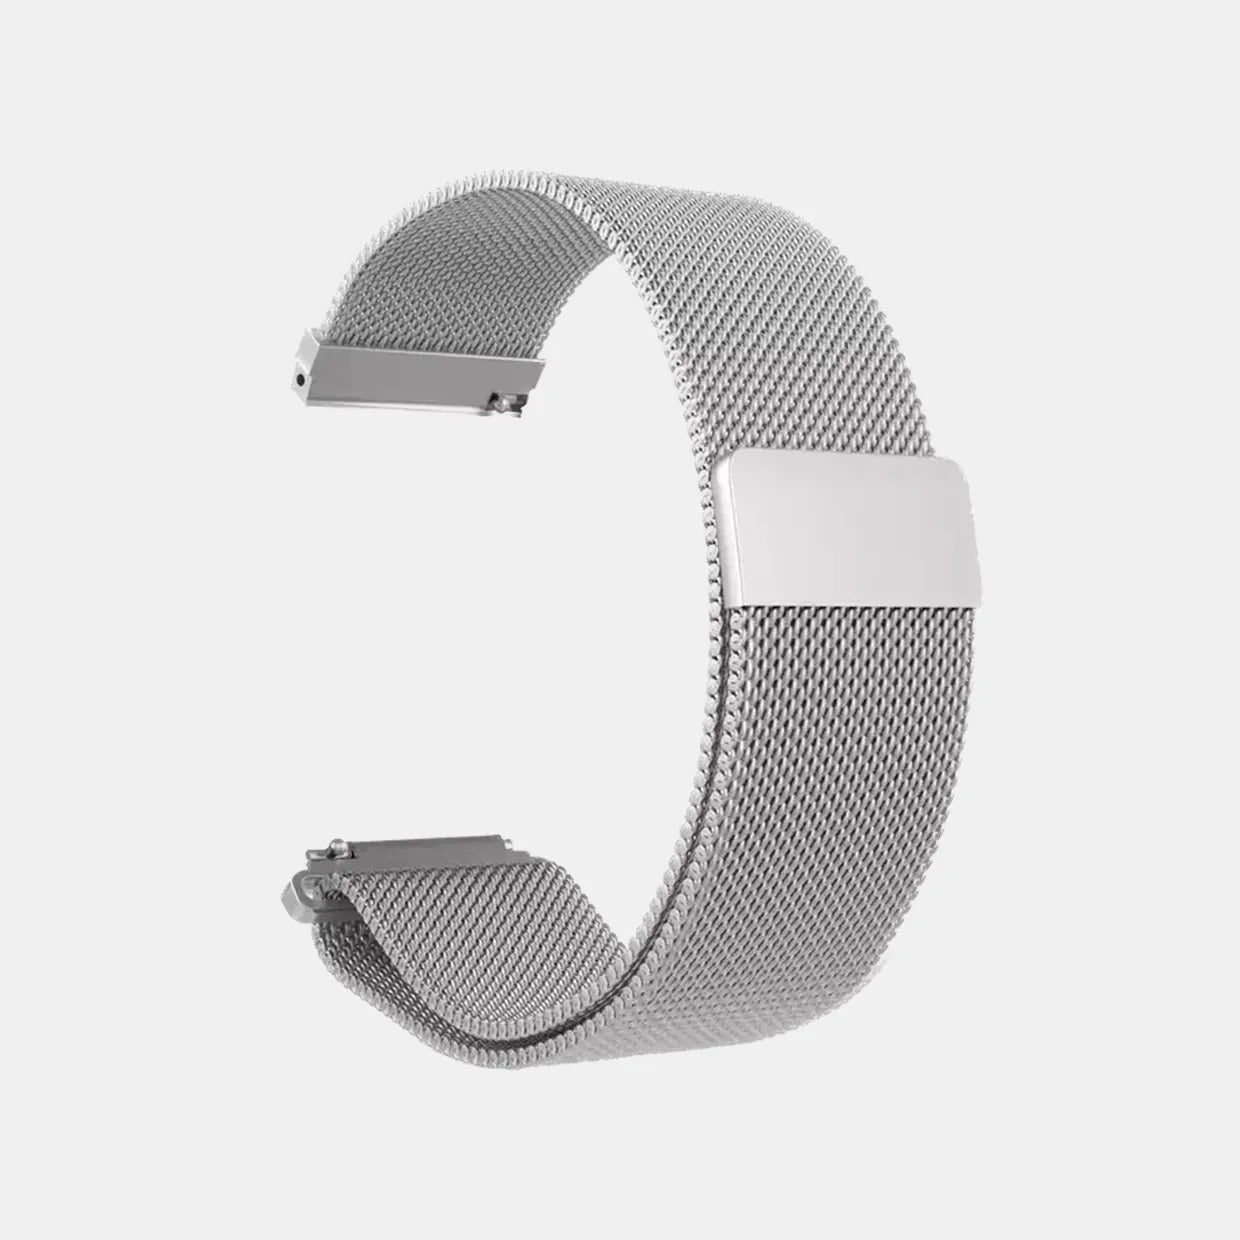 Elevate your style with our Silver Mesh Bracelet, designed to complement our innovative rim-inspired timepieces. Crafted by a dynamic German startup, these watches feature cutting-edge design, appealing to motorsport, tuning, and car enthusiasts. Upgrade your wrist game today! #id_46744490279242